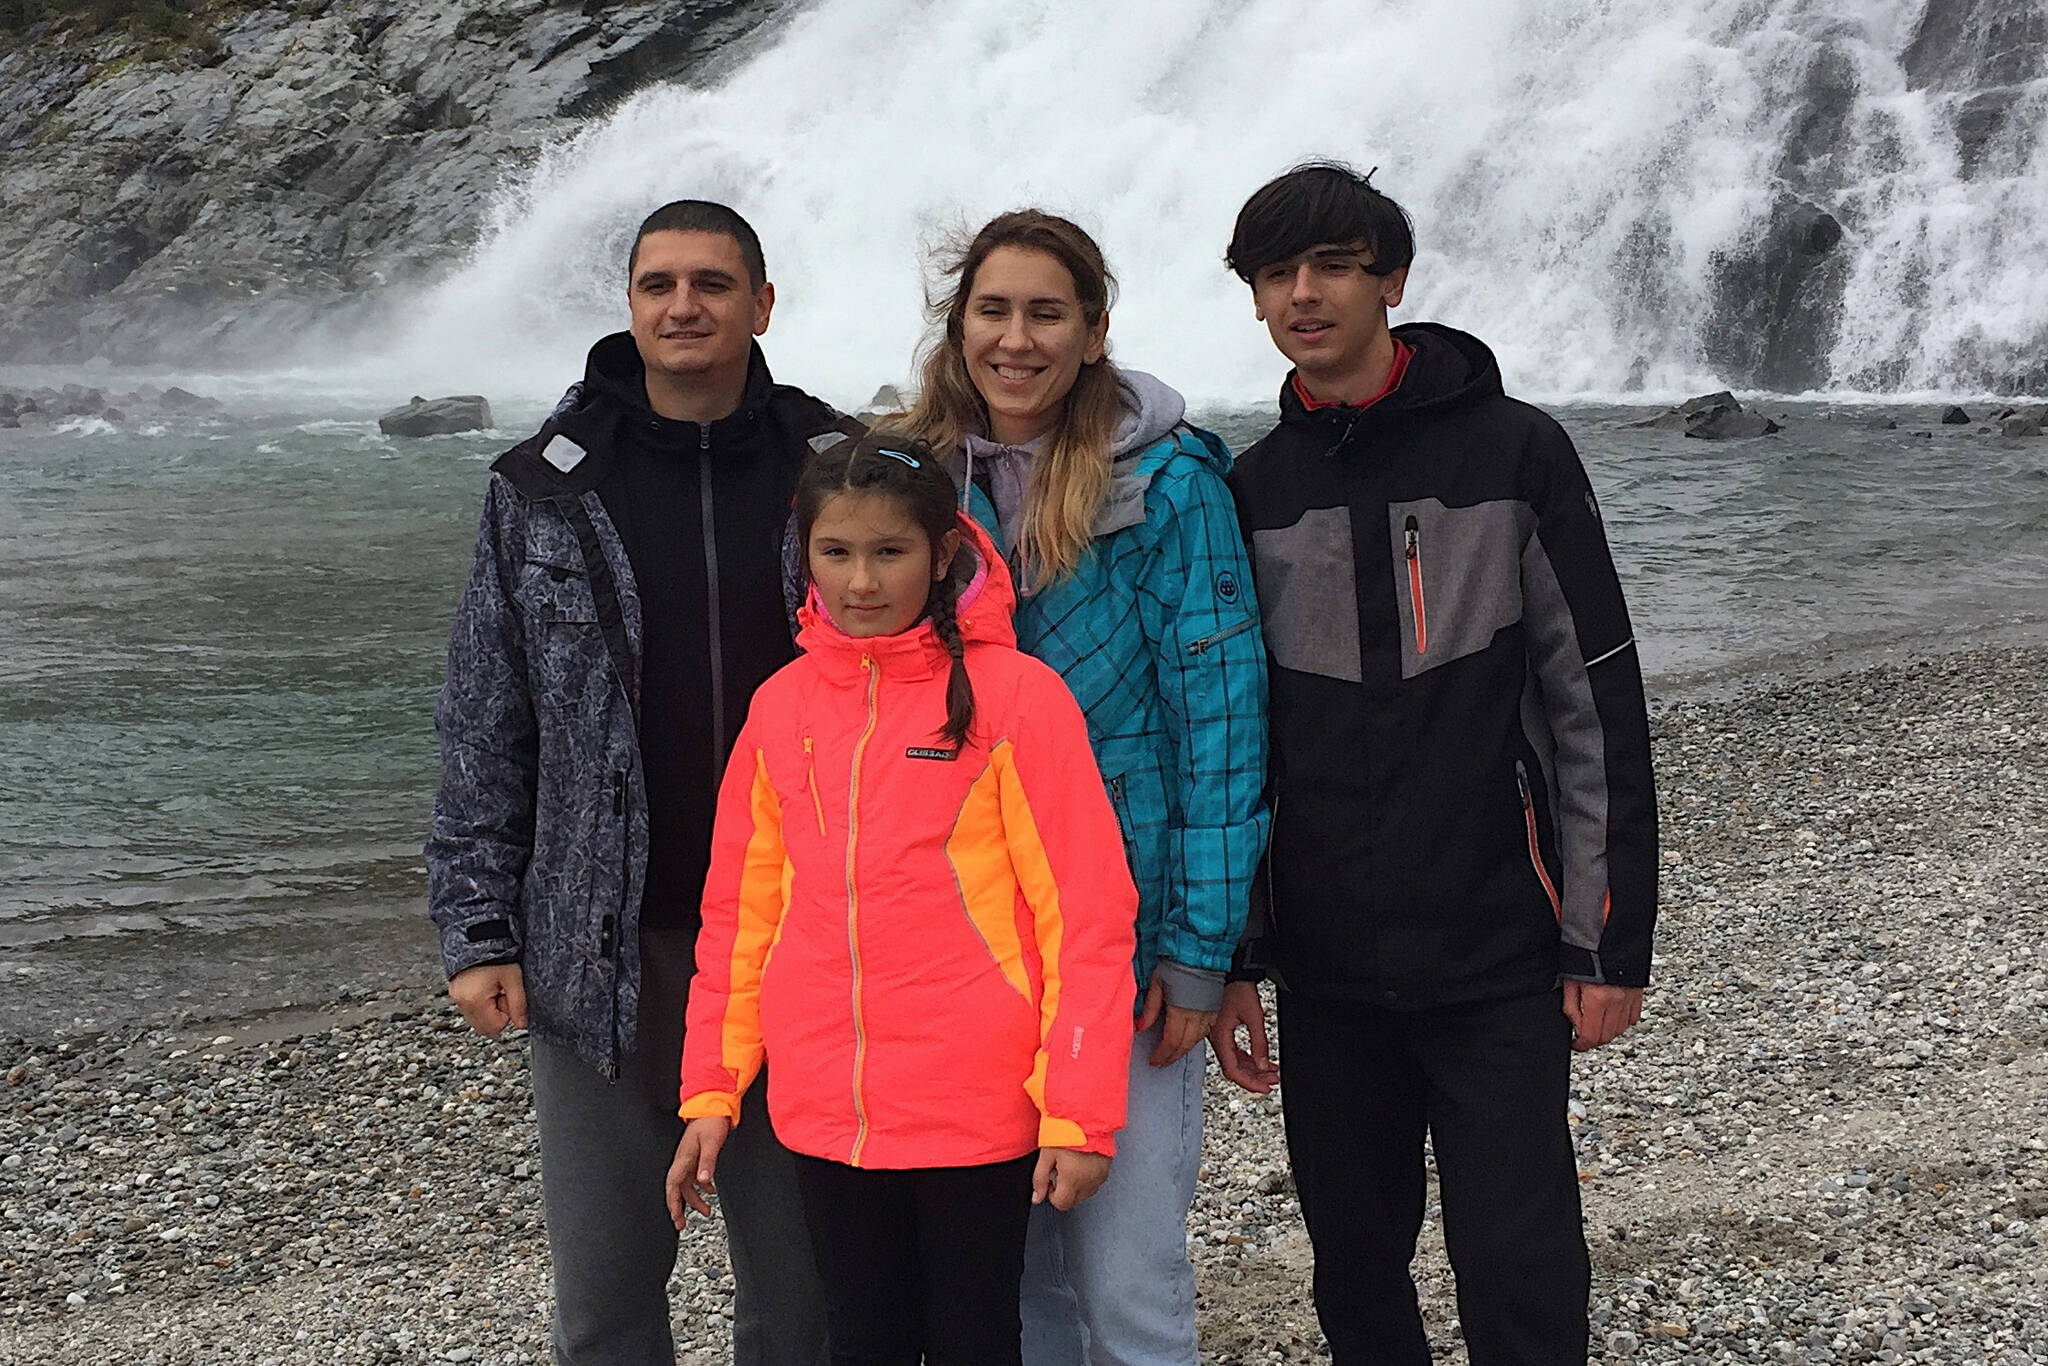 Courtesy Photo / Kate Troll 
Andrii Pomynalnyi, left, his wife Olena, son Yehor and daughter Irynka visit Nugget Falls on Sept. 28, the same day the Ukrainian family arrived in Juneau after a journey that began Feb. 24 with Russian attacks near their home in Kyiv. The father said he is hoping the family can remain in Juneau for at least two years and possible beyond due to the destruction and future uncertainty in his homeland.